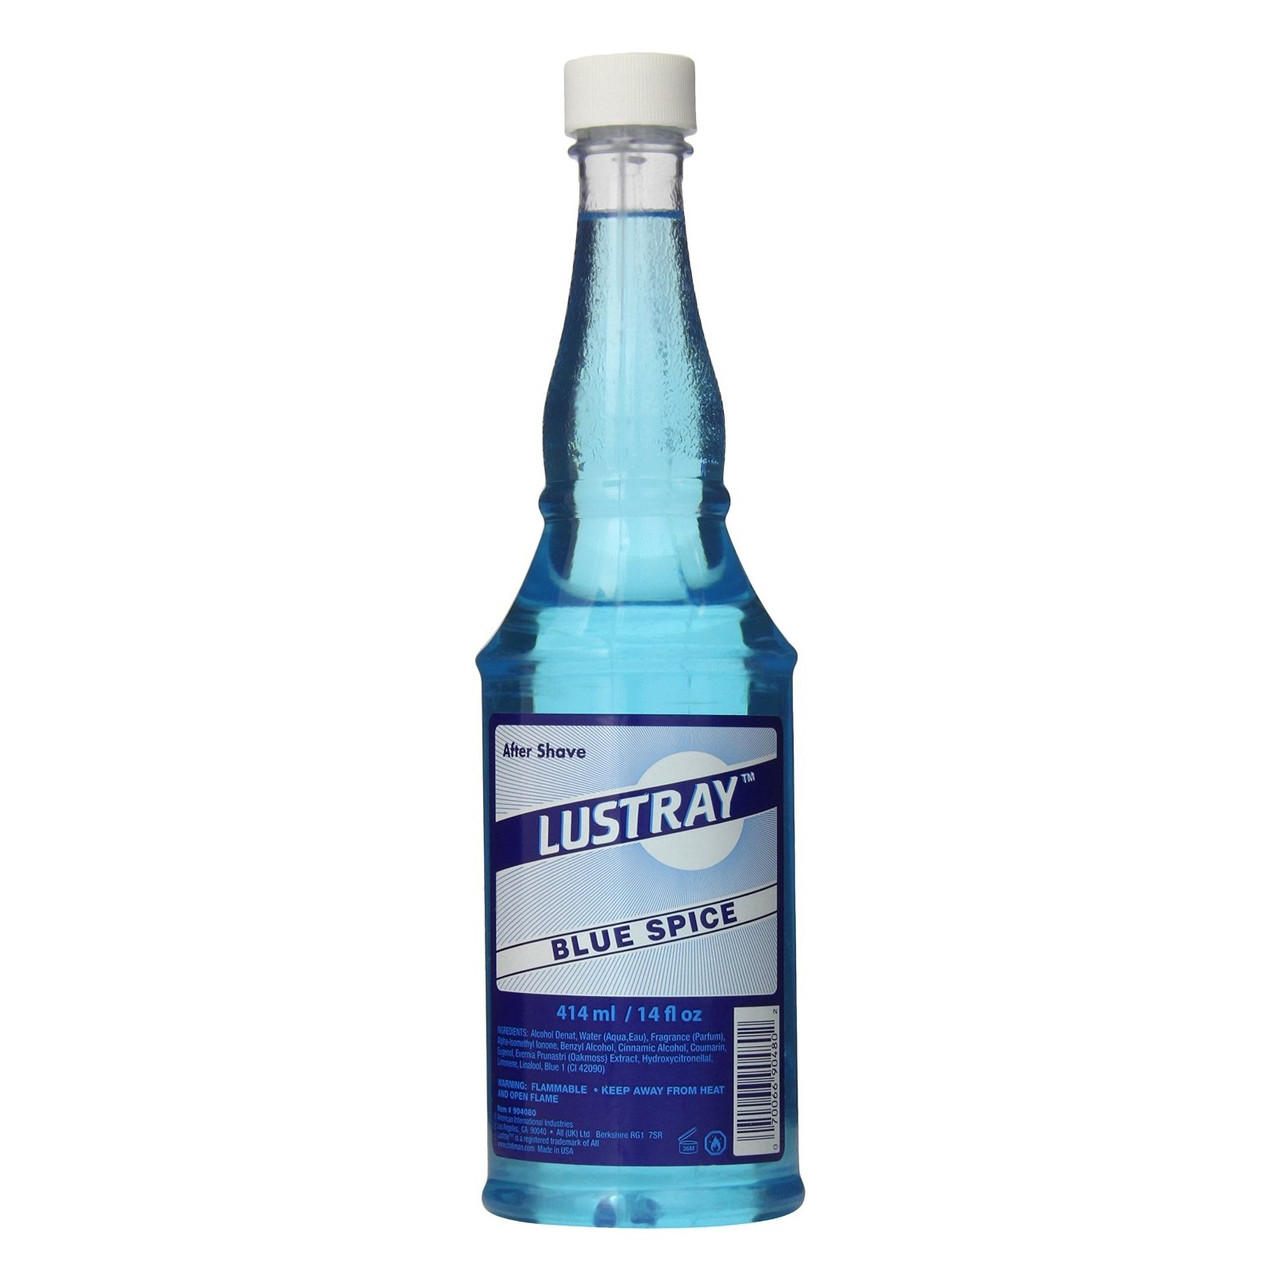 Clubman Pinaud Blue Spice After Shave - 14 fl oz